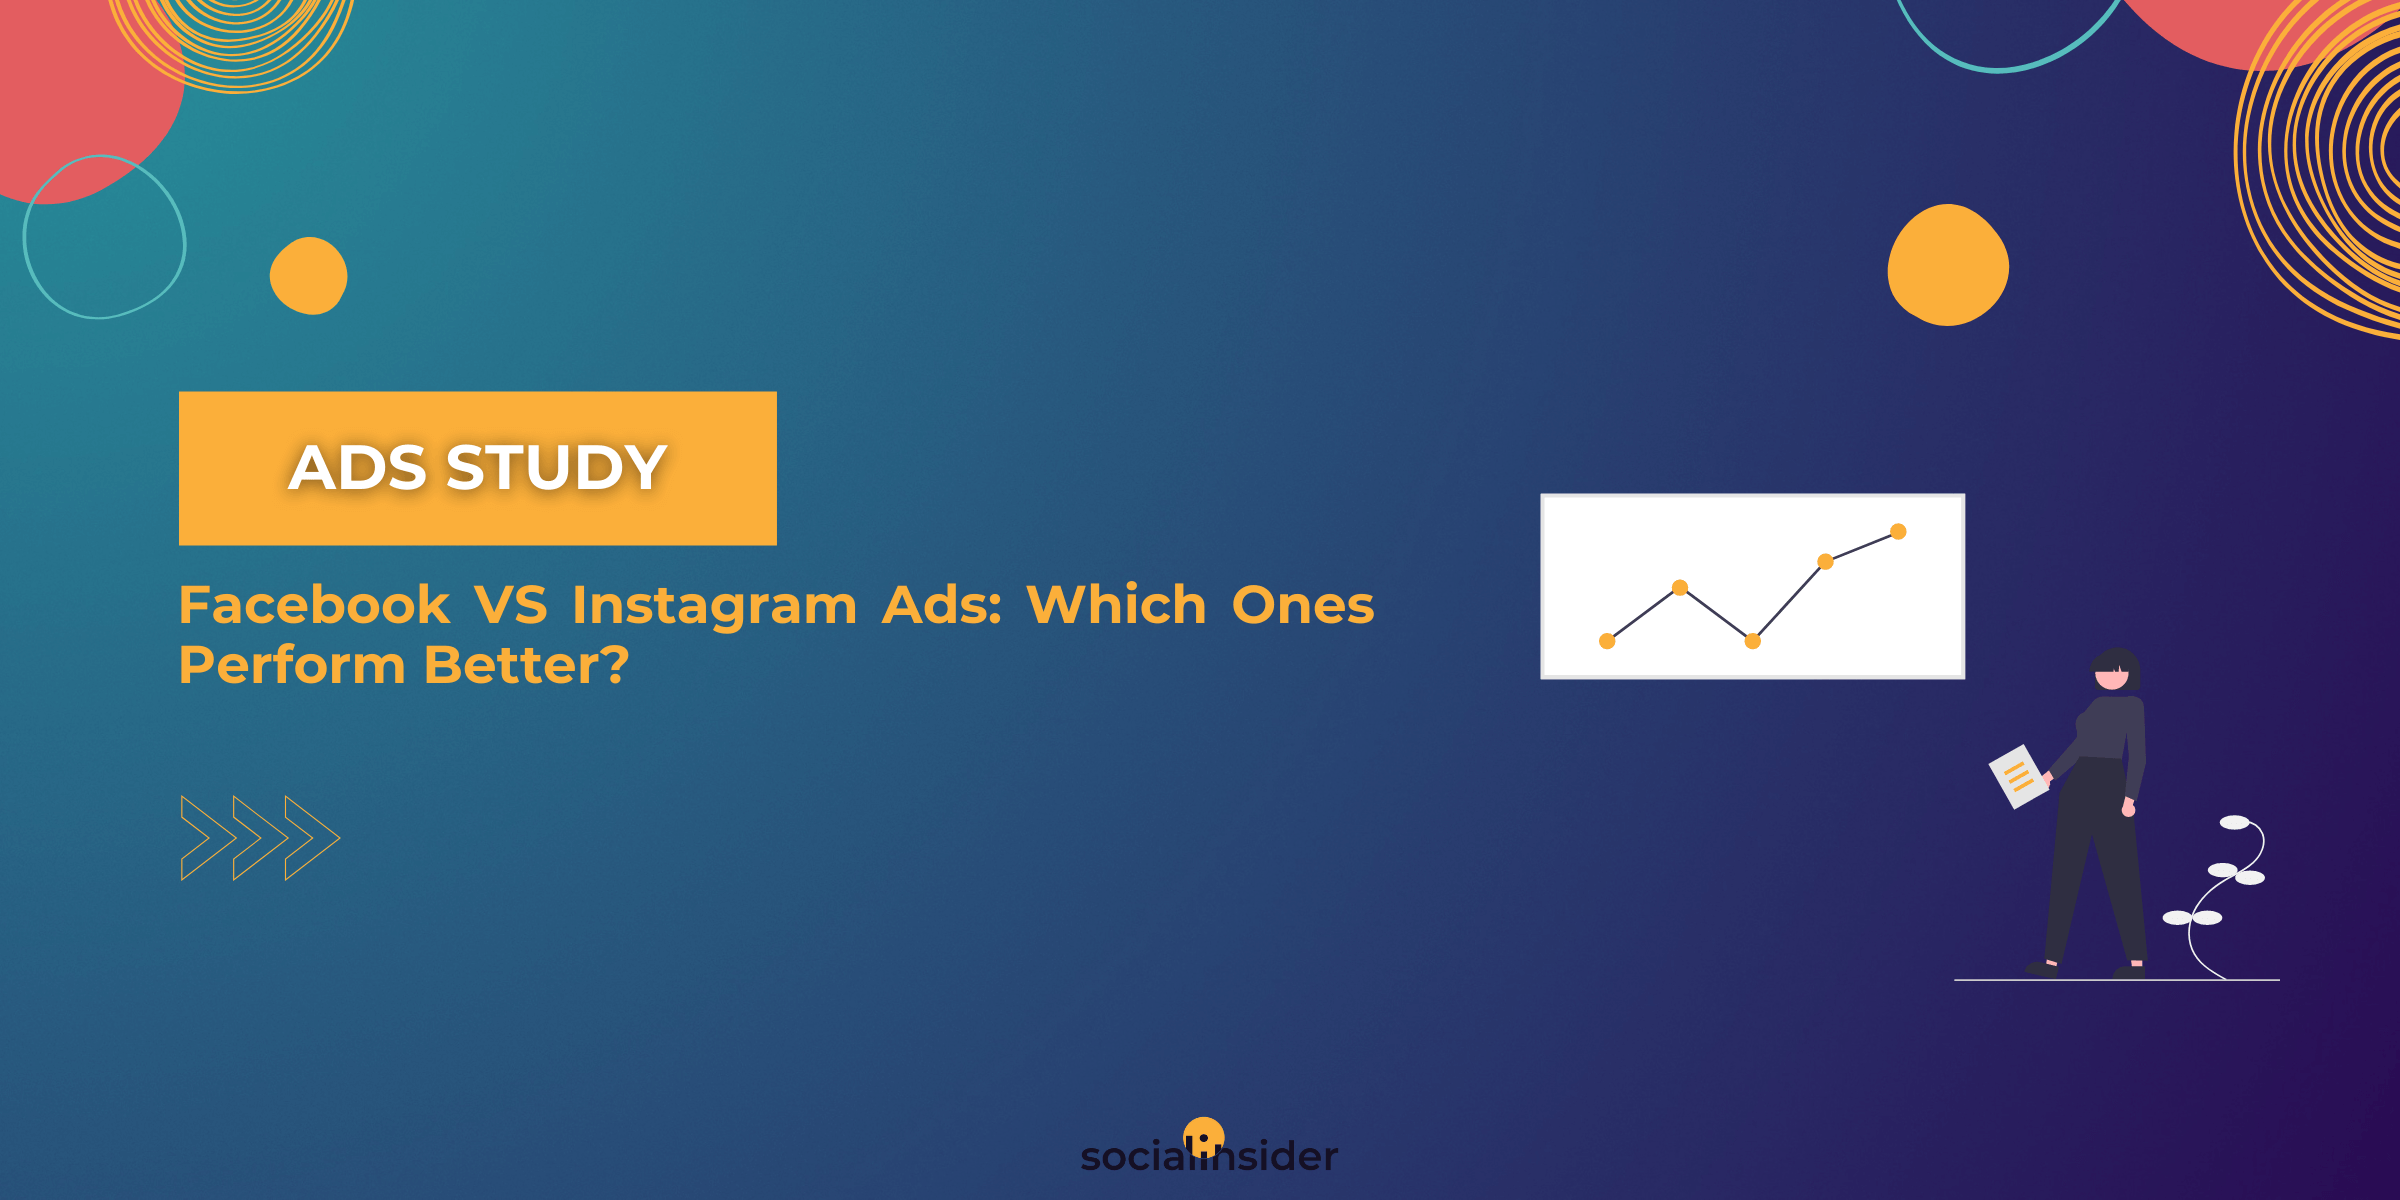 [STUDY] Facebook Ads VS Instagram Ads: 137,228 Paid Social Posts Show What Kind of Social Media Ads Generate the Best Results